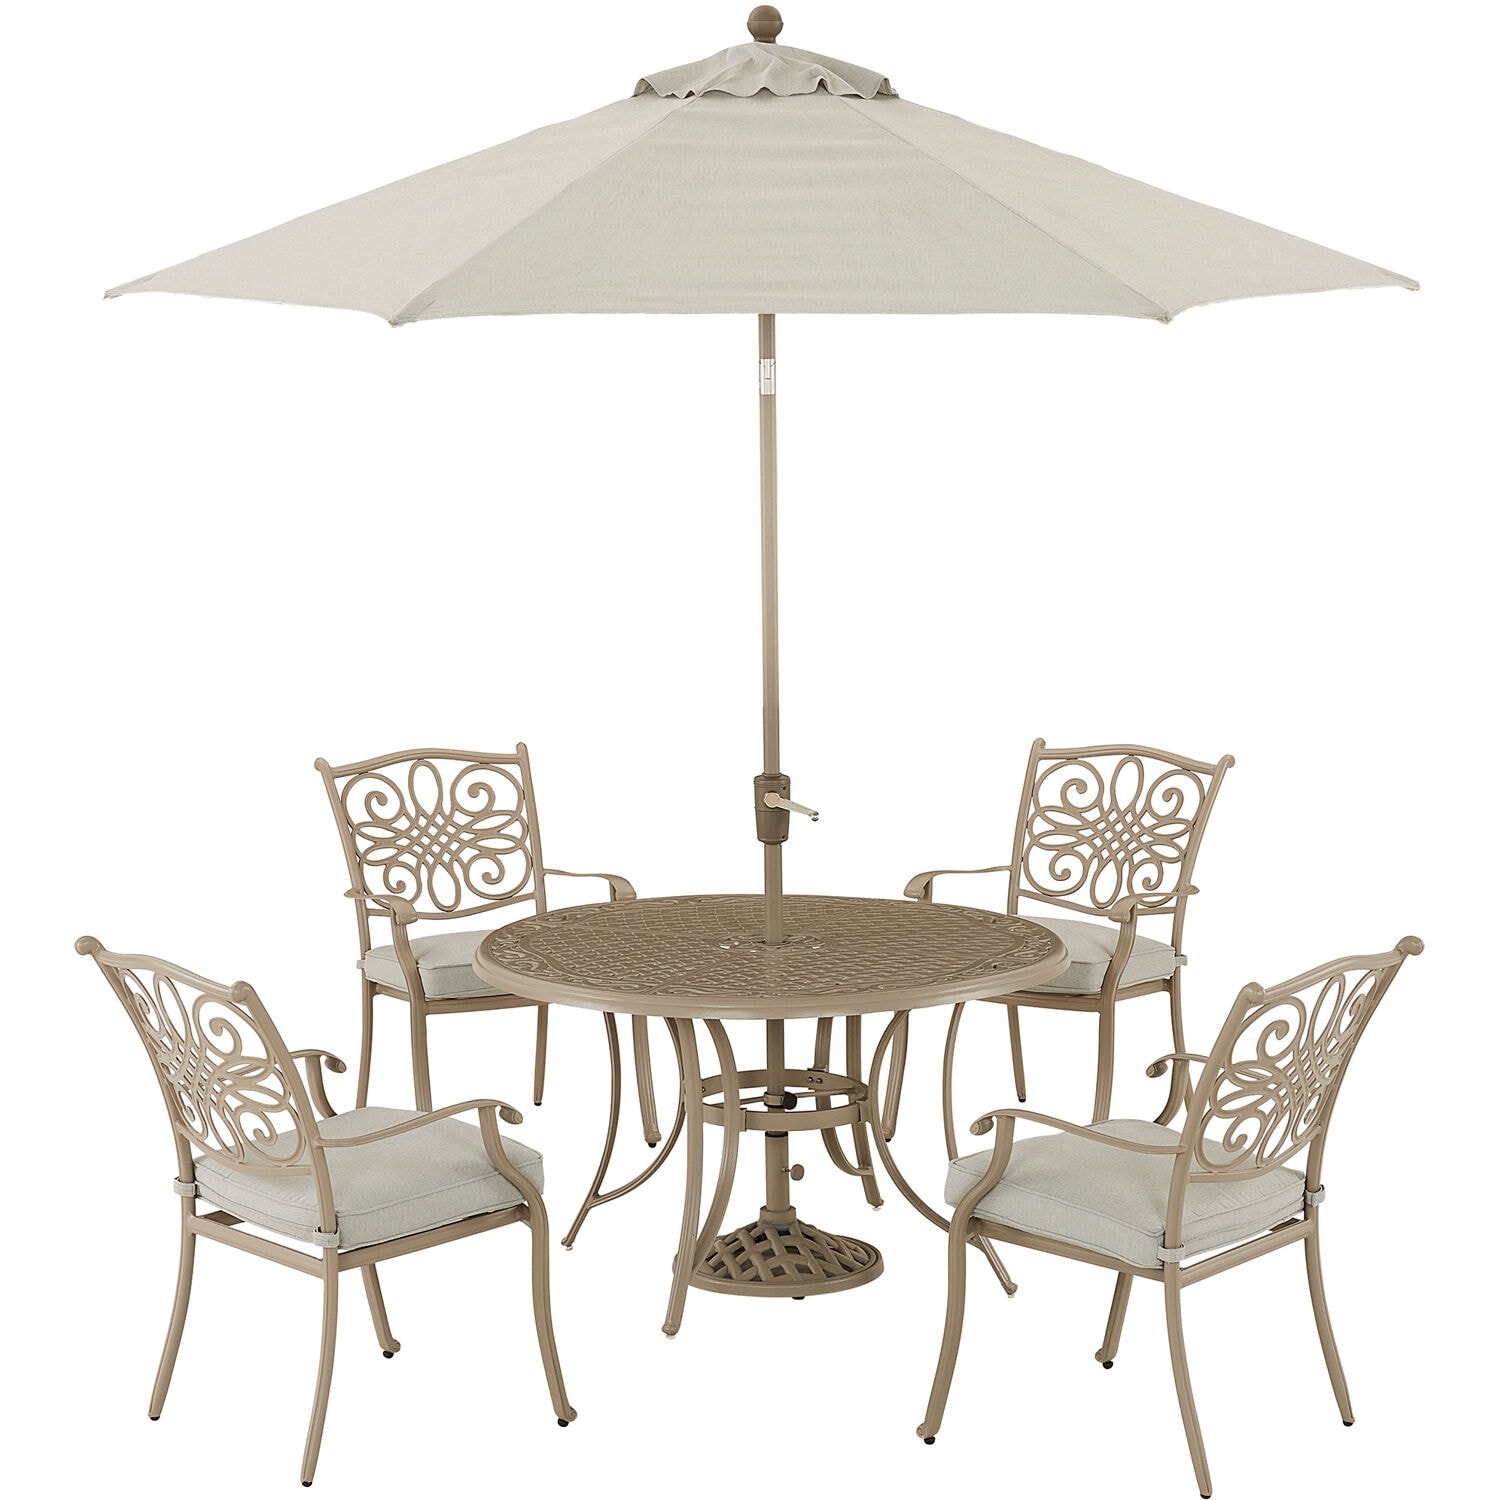 Hanover Traditions 5-piece Dining Set With 4 Stationary Chairs  48-in. Cast-top Table  9-ft. Umbrella  And Stand  Sand Finish